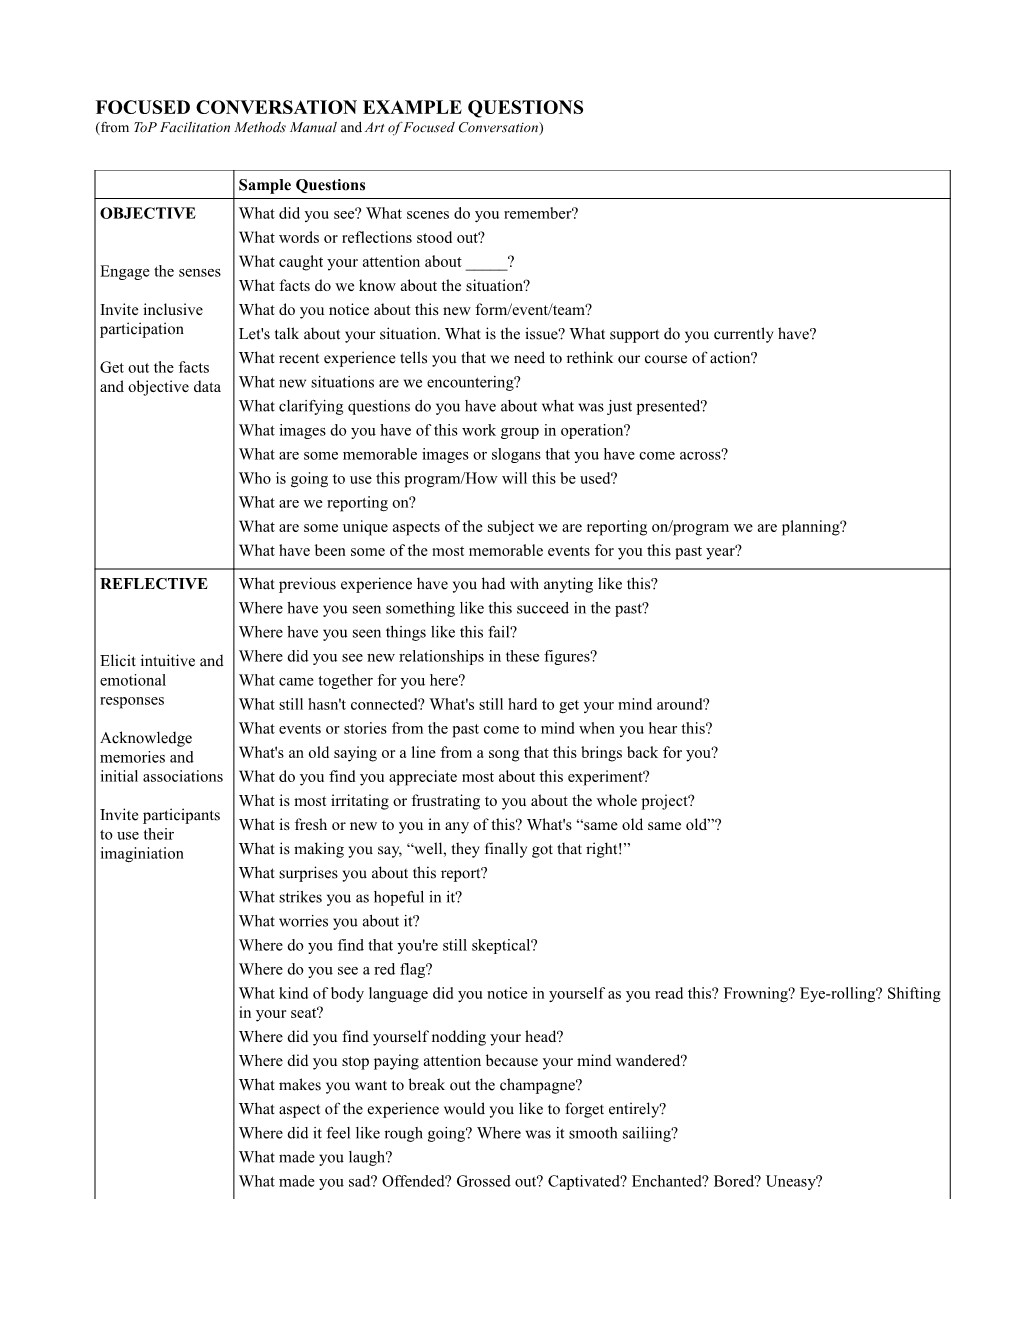 Focused Conversation Example Questions